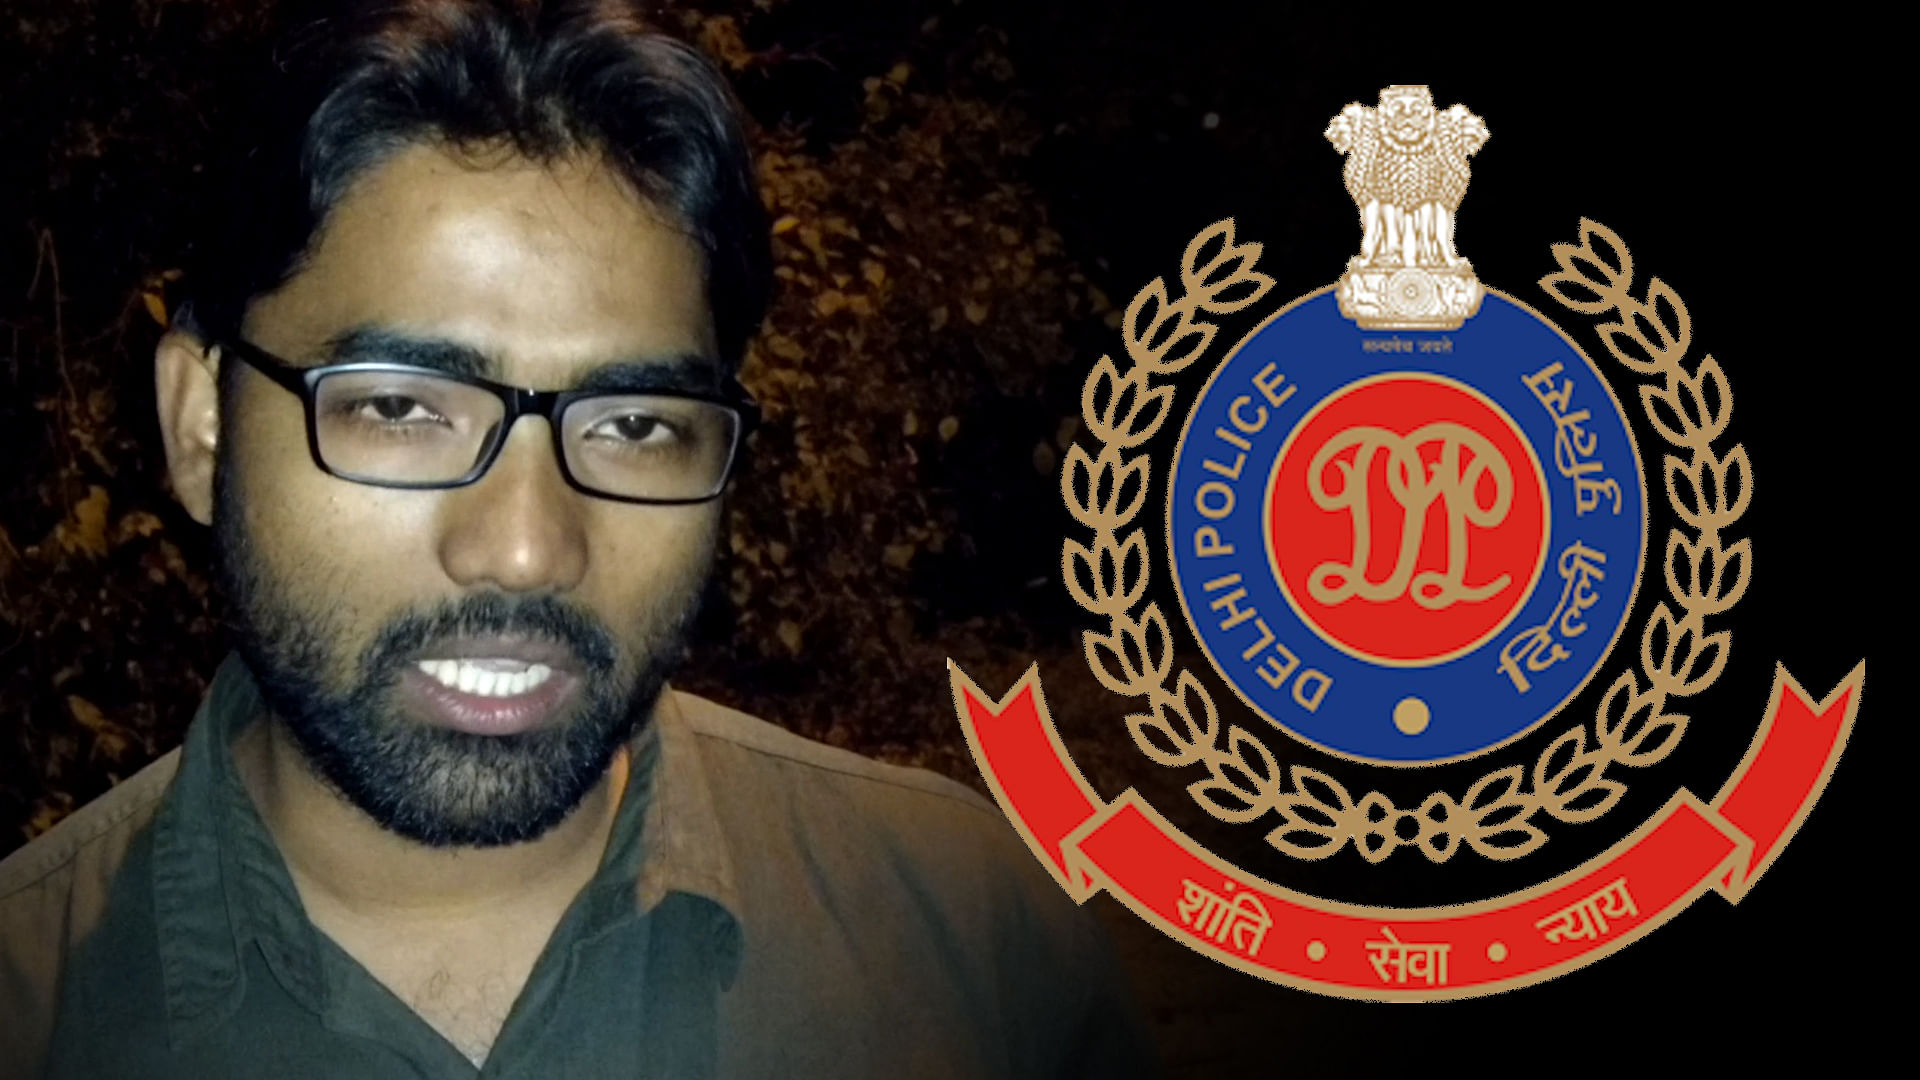 <b>The Quint</b> spoke to Ashutosh Kumar, one of the JNU students accused of sedition charges. (Photo: Altered by <b>The Quint</b>)